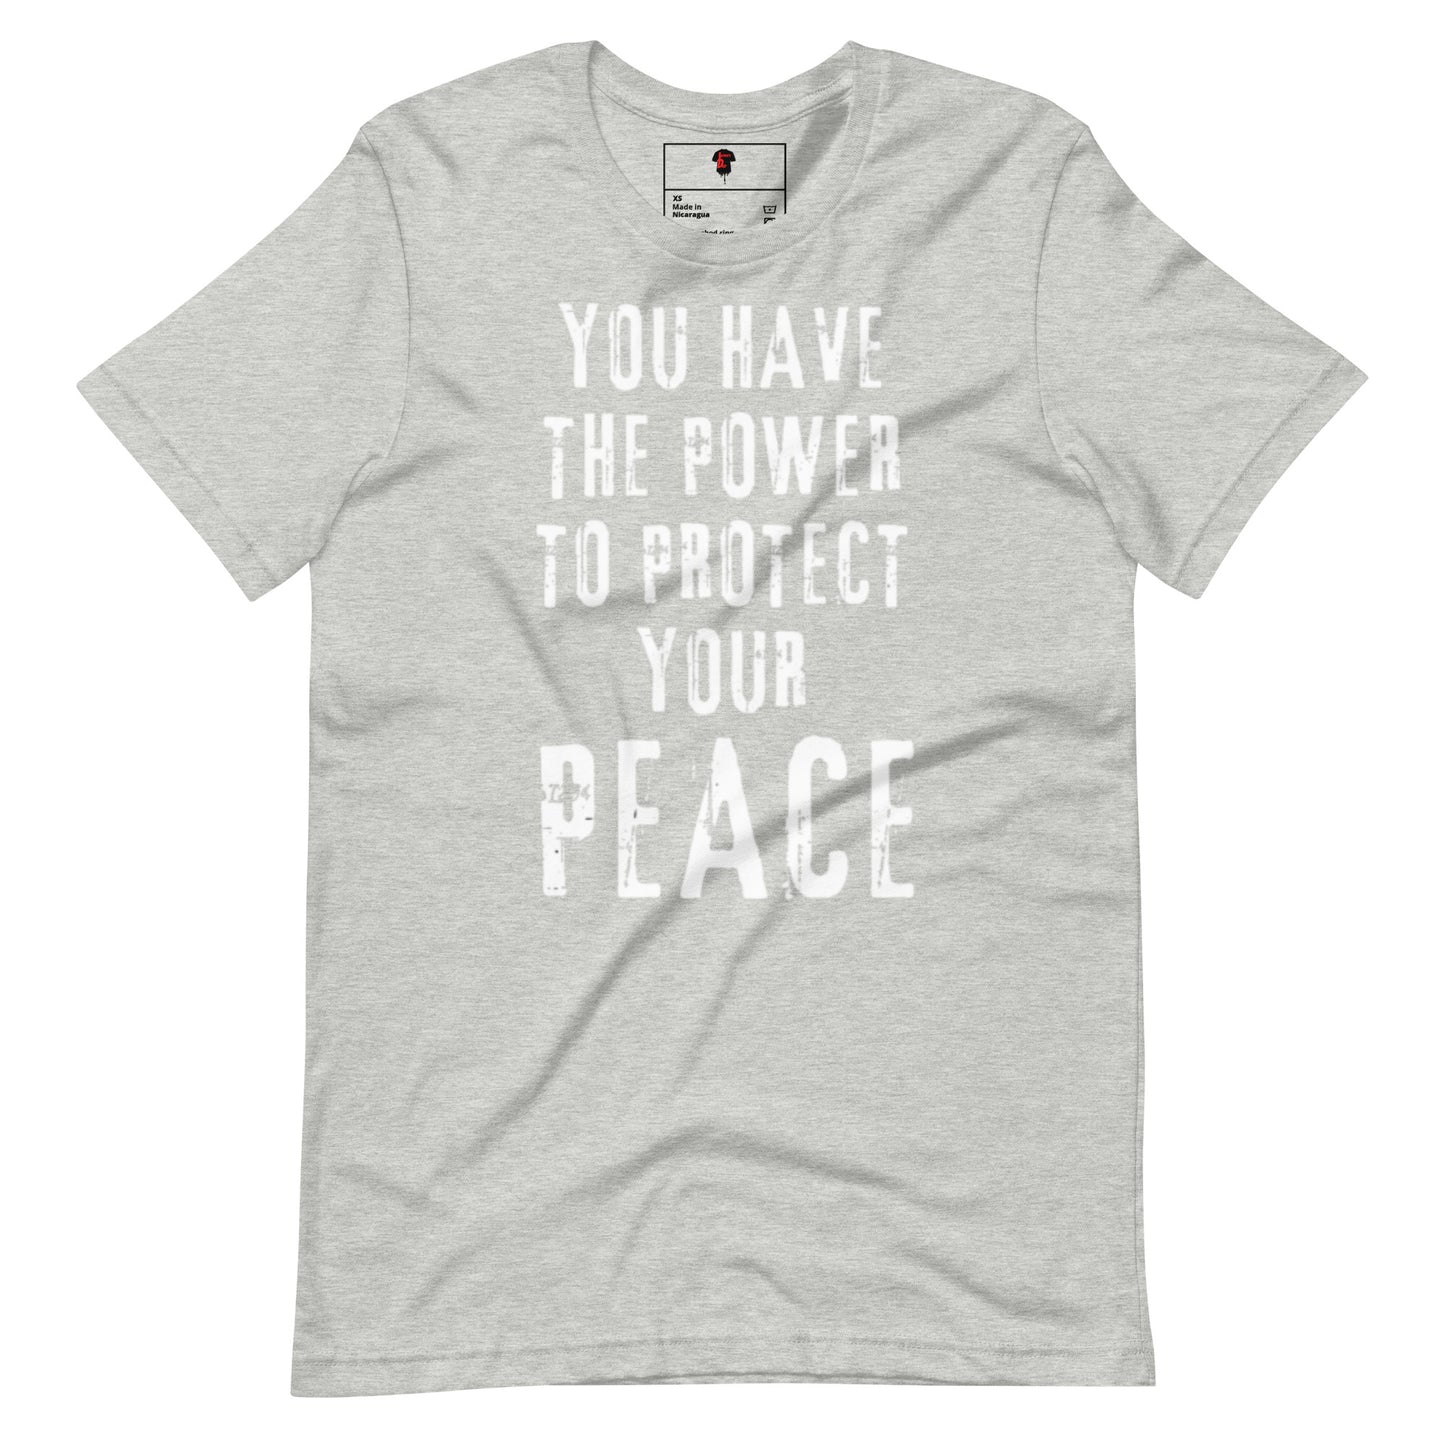 Protect Your Peace t-shirt